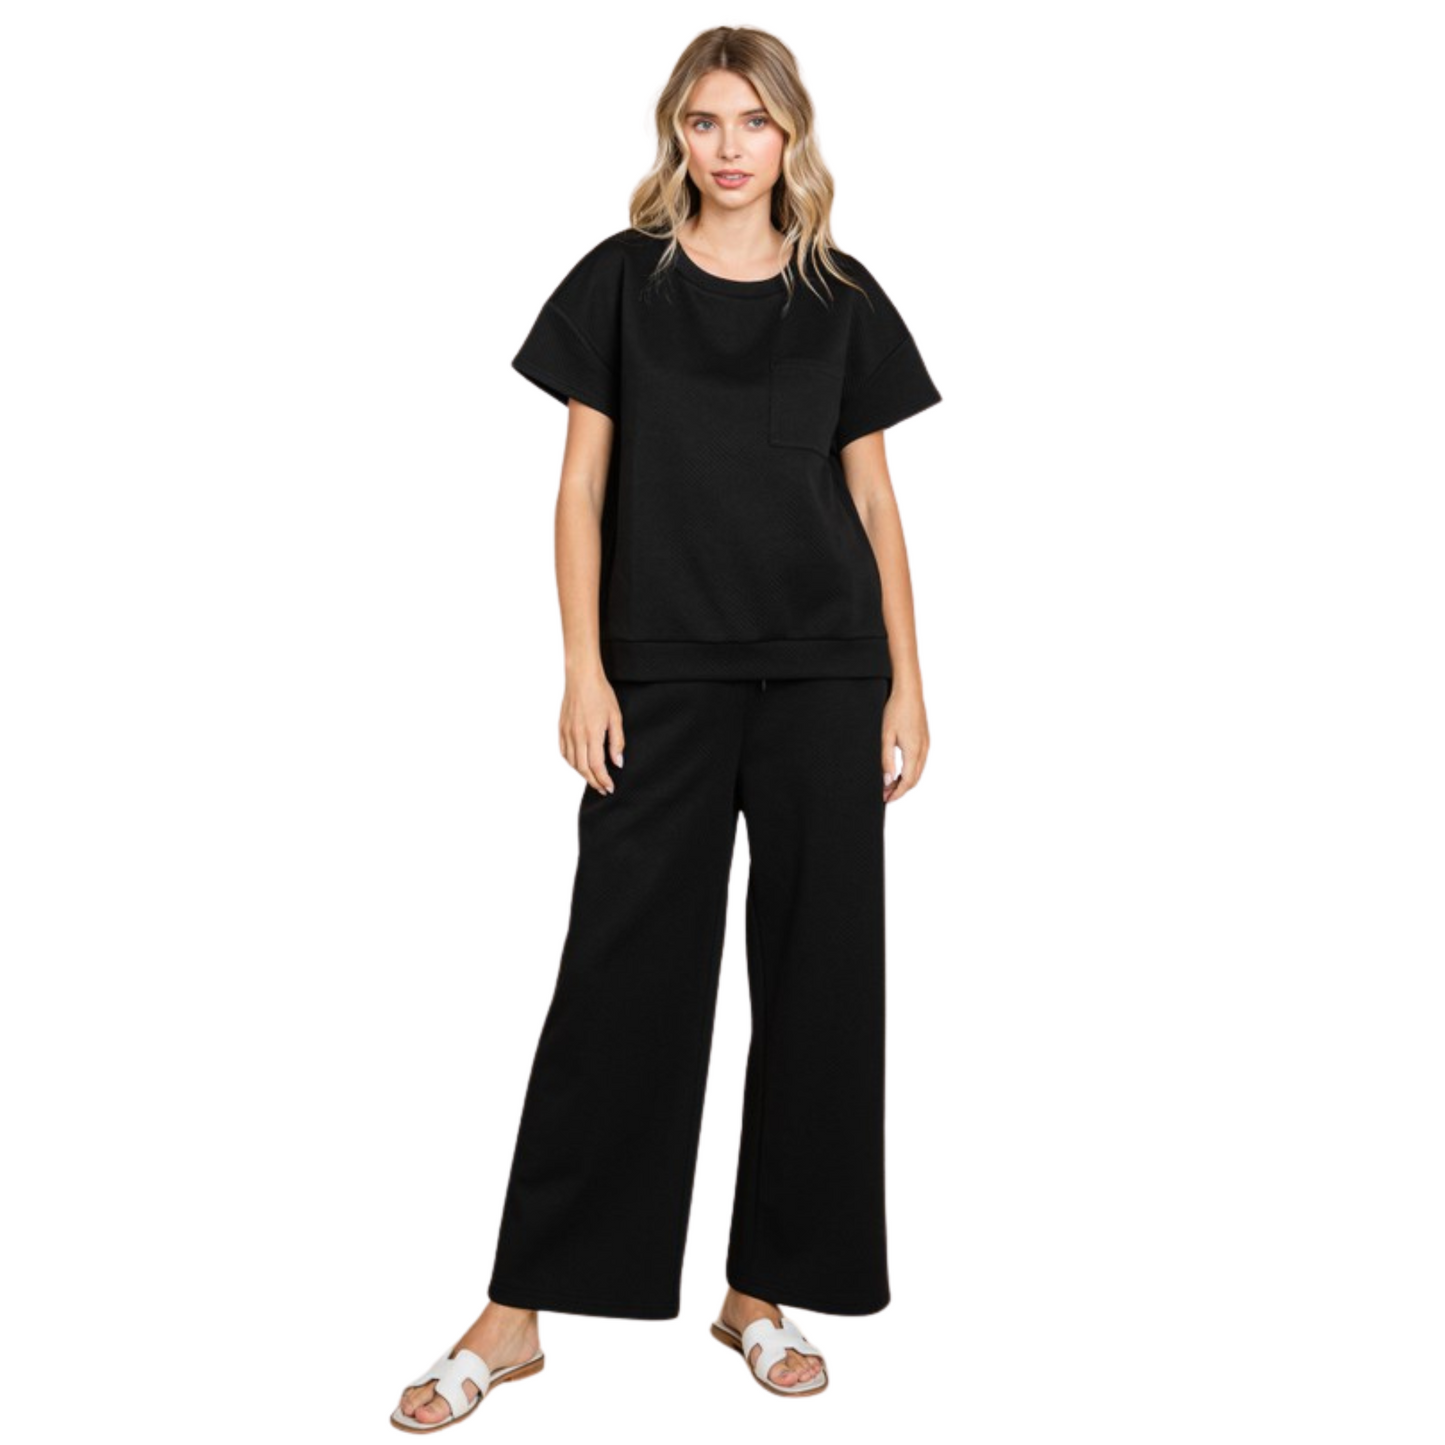 This black top and bottom set features a textured U-neck top with short kimono sleeves and band hems. Made of lightweight, non-sheer fabric, this set offers comfort and style. Perfect for any occasion, a must-have for any wardrobe. Model is 5'8'' and is wearing a Small. 